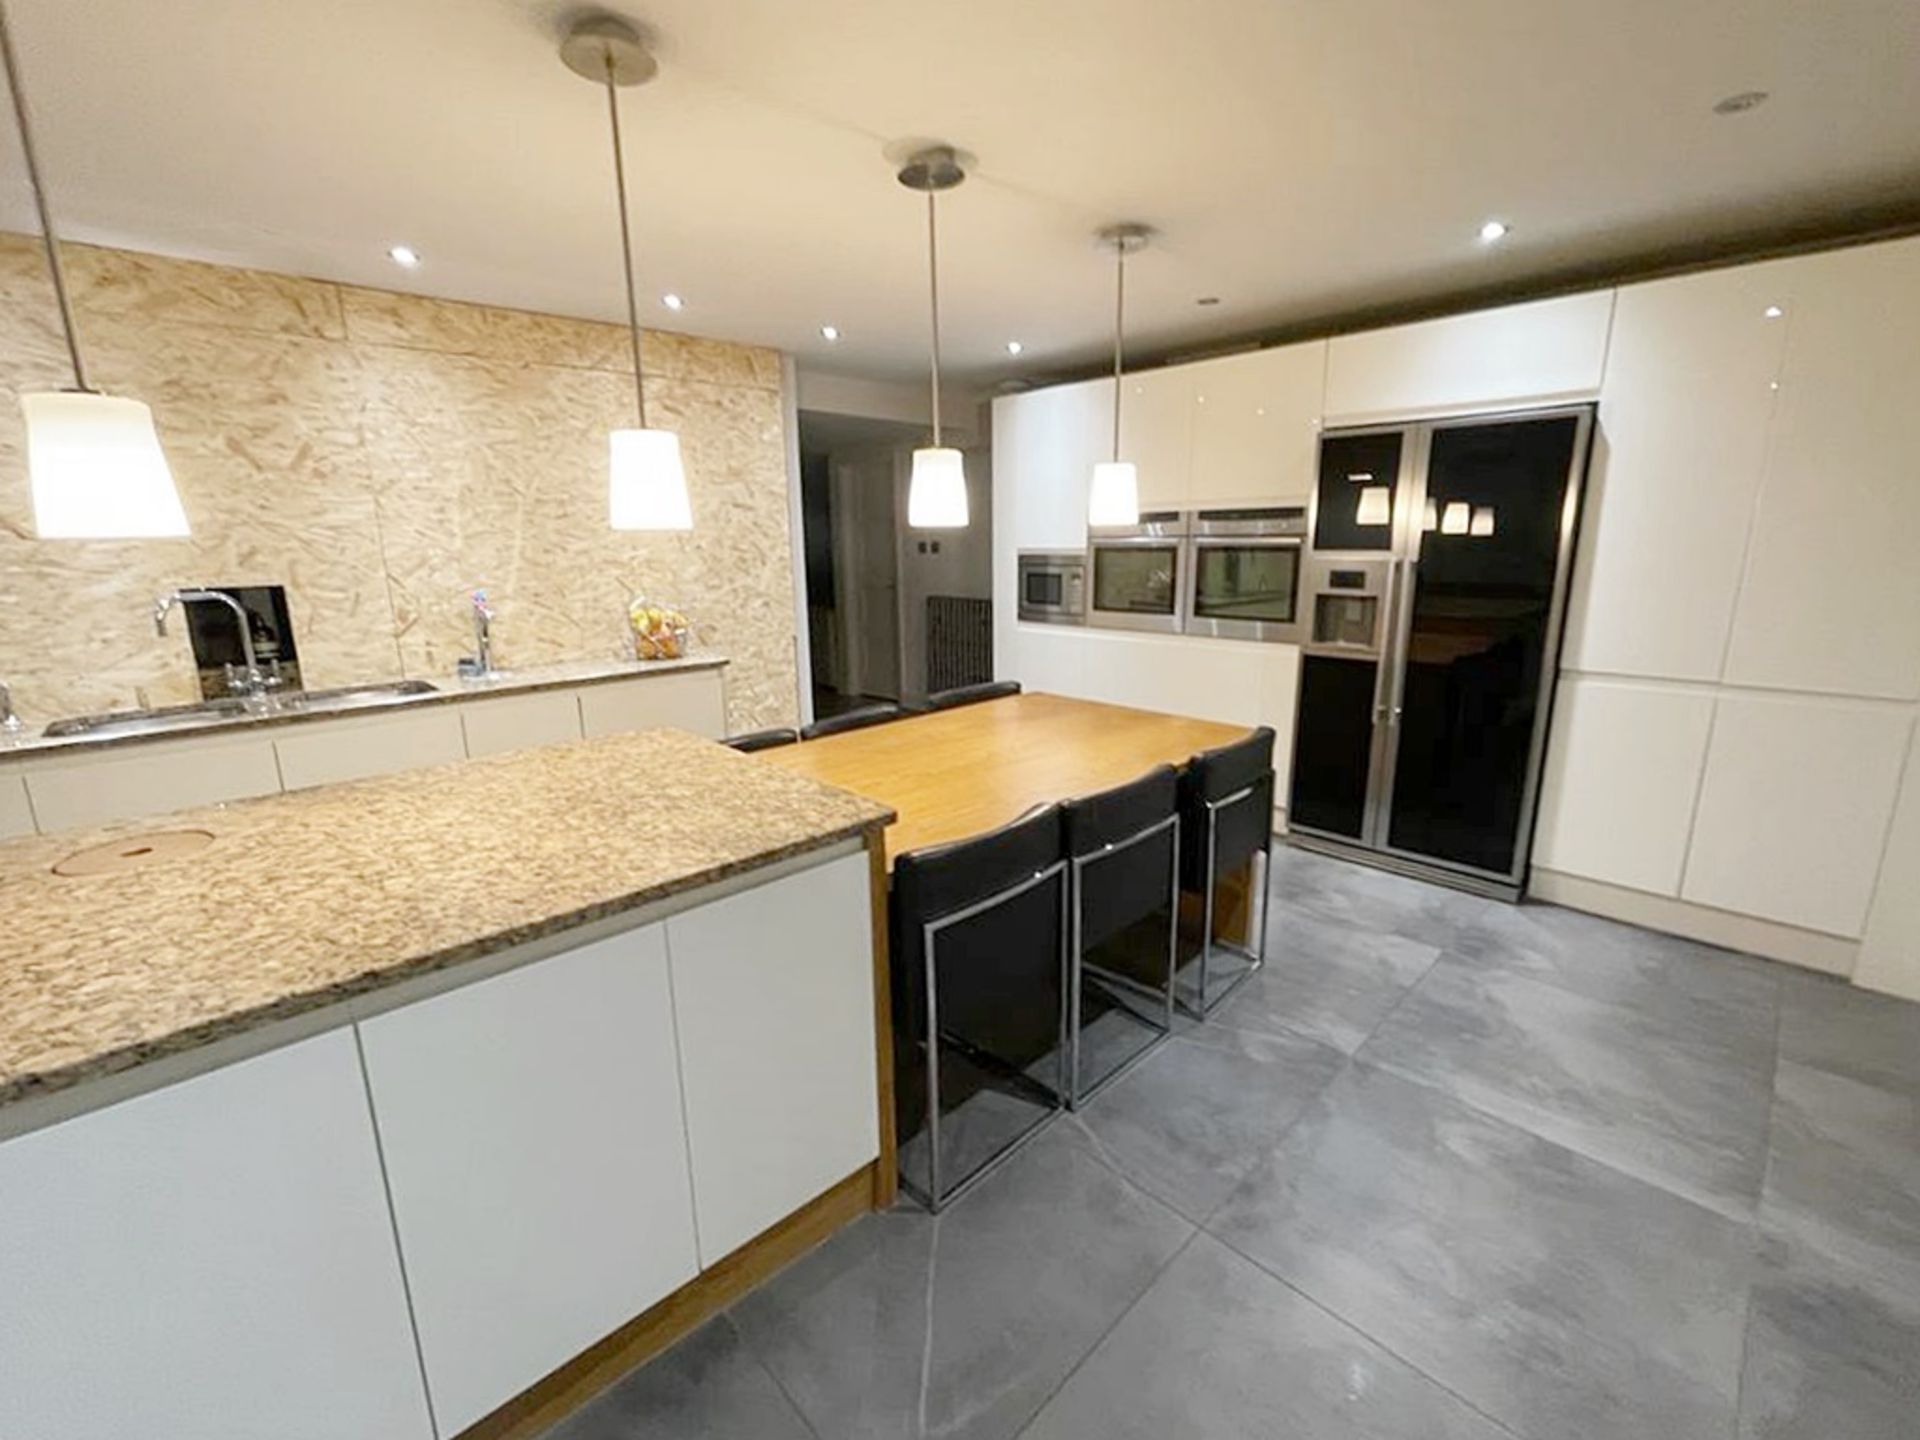 1 x Stunning PARAPAN Handleless Fitted Kitchen with Neff Appliances, Granite Worktops & Island - Image 6 of 126